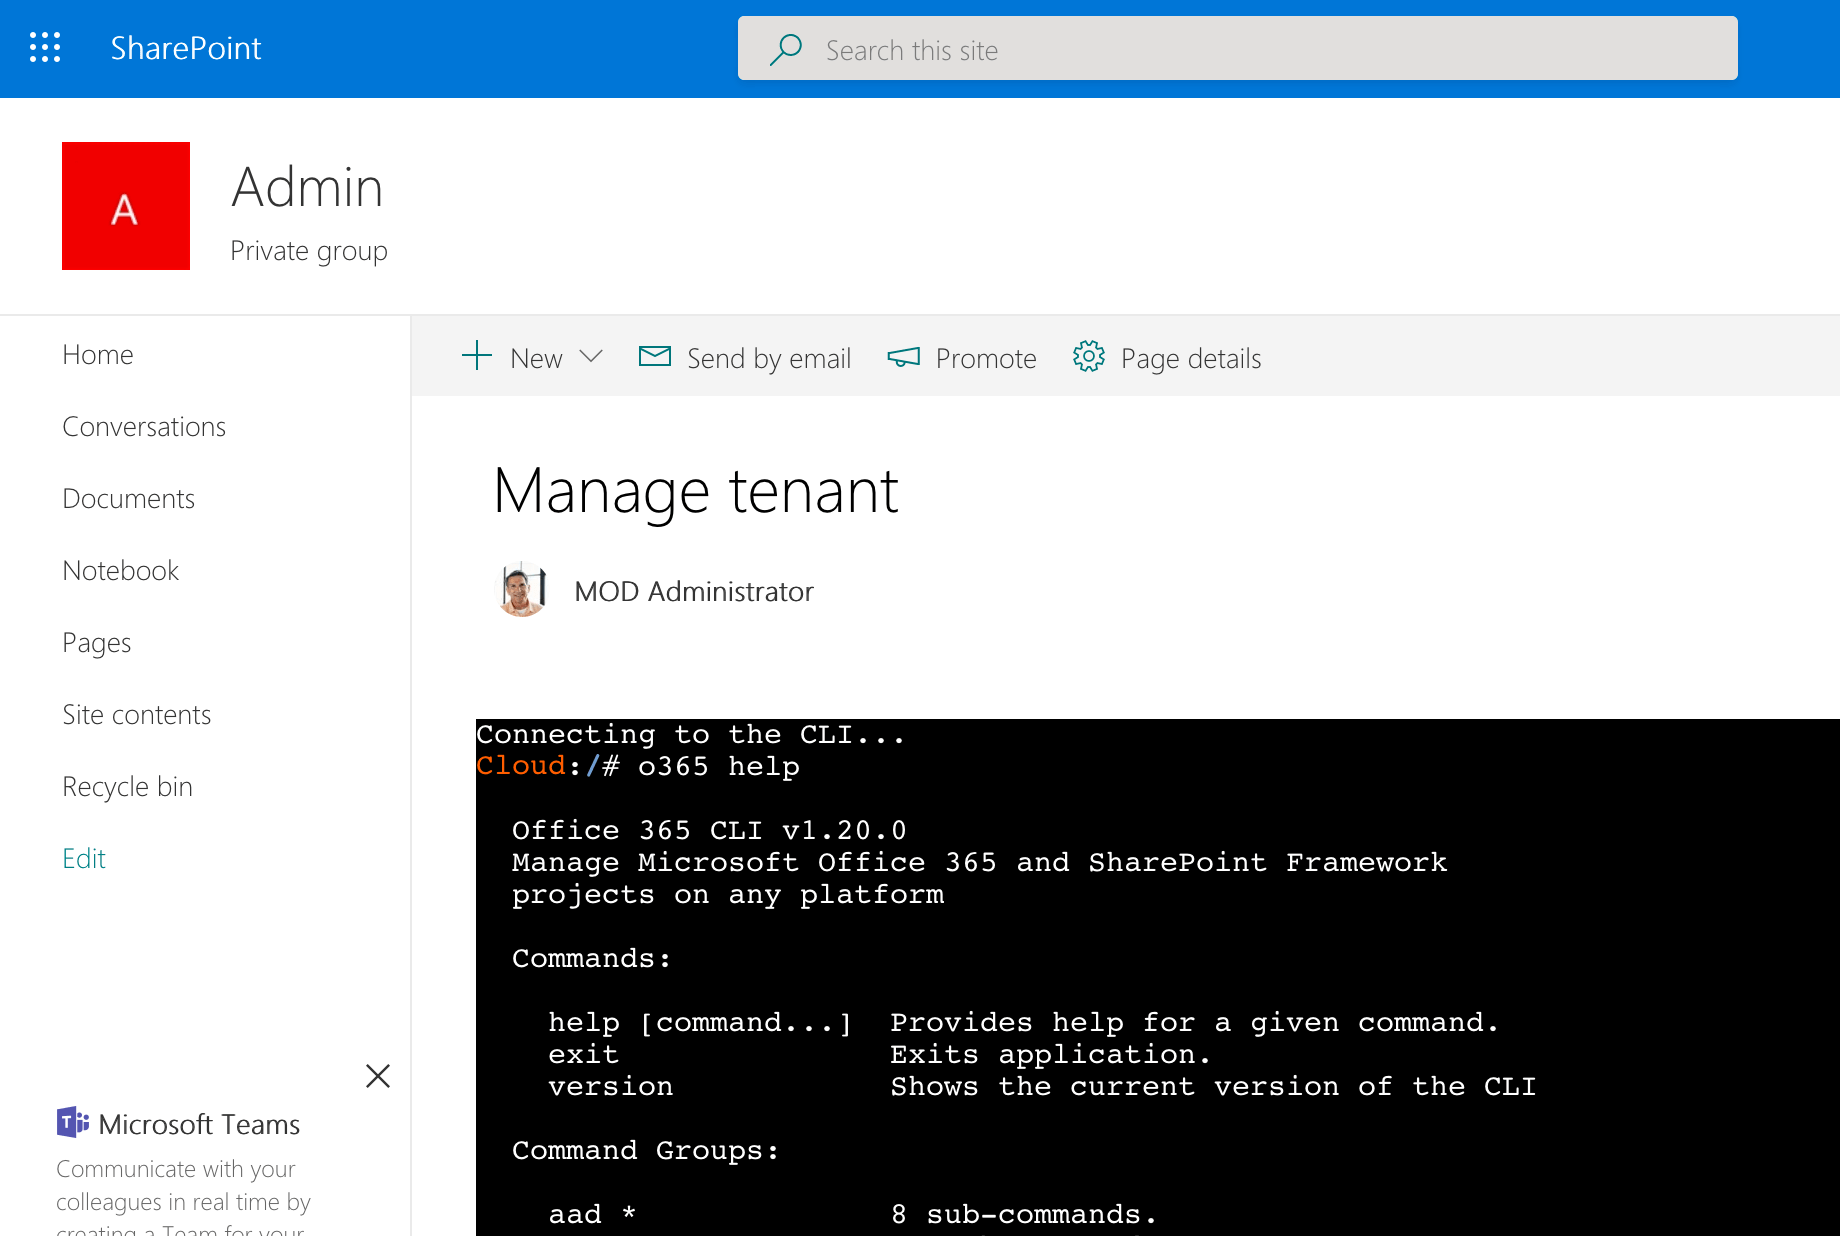 SharePoint Framework web part communicating with Office 365 CLI deployed in a Docker container